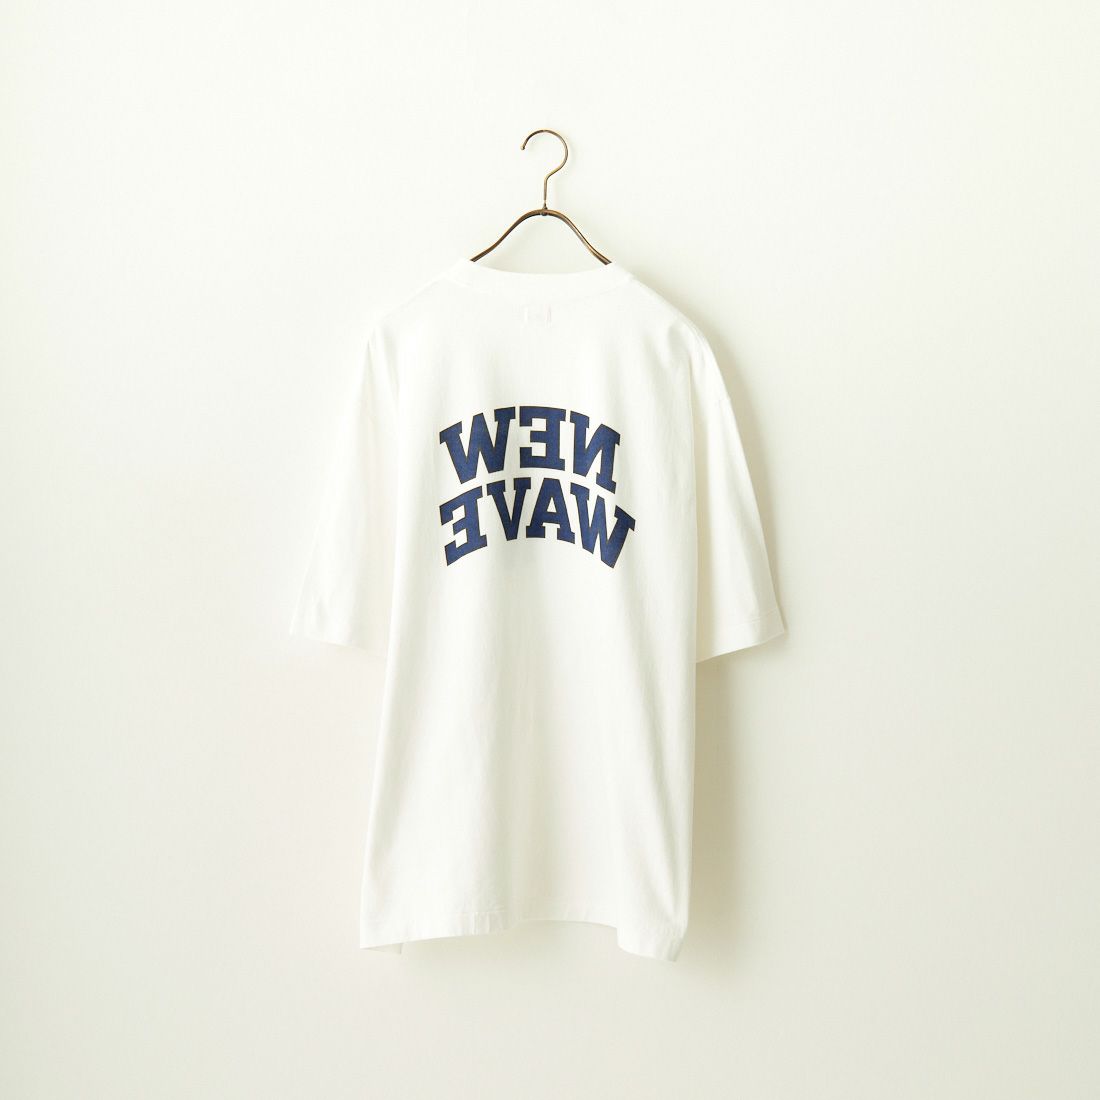 blurhms ROOTSTOCK [ブラームス ルーツストック] 別注 NEW WAVE プリントTシャツ [BROOTS24S34-JF] WHITE